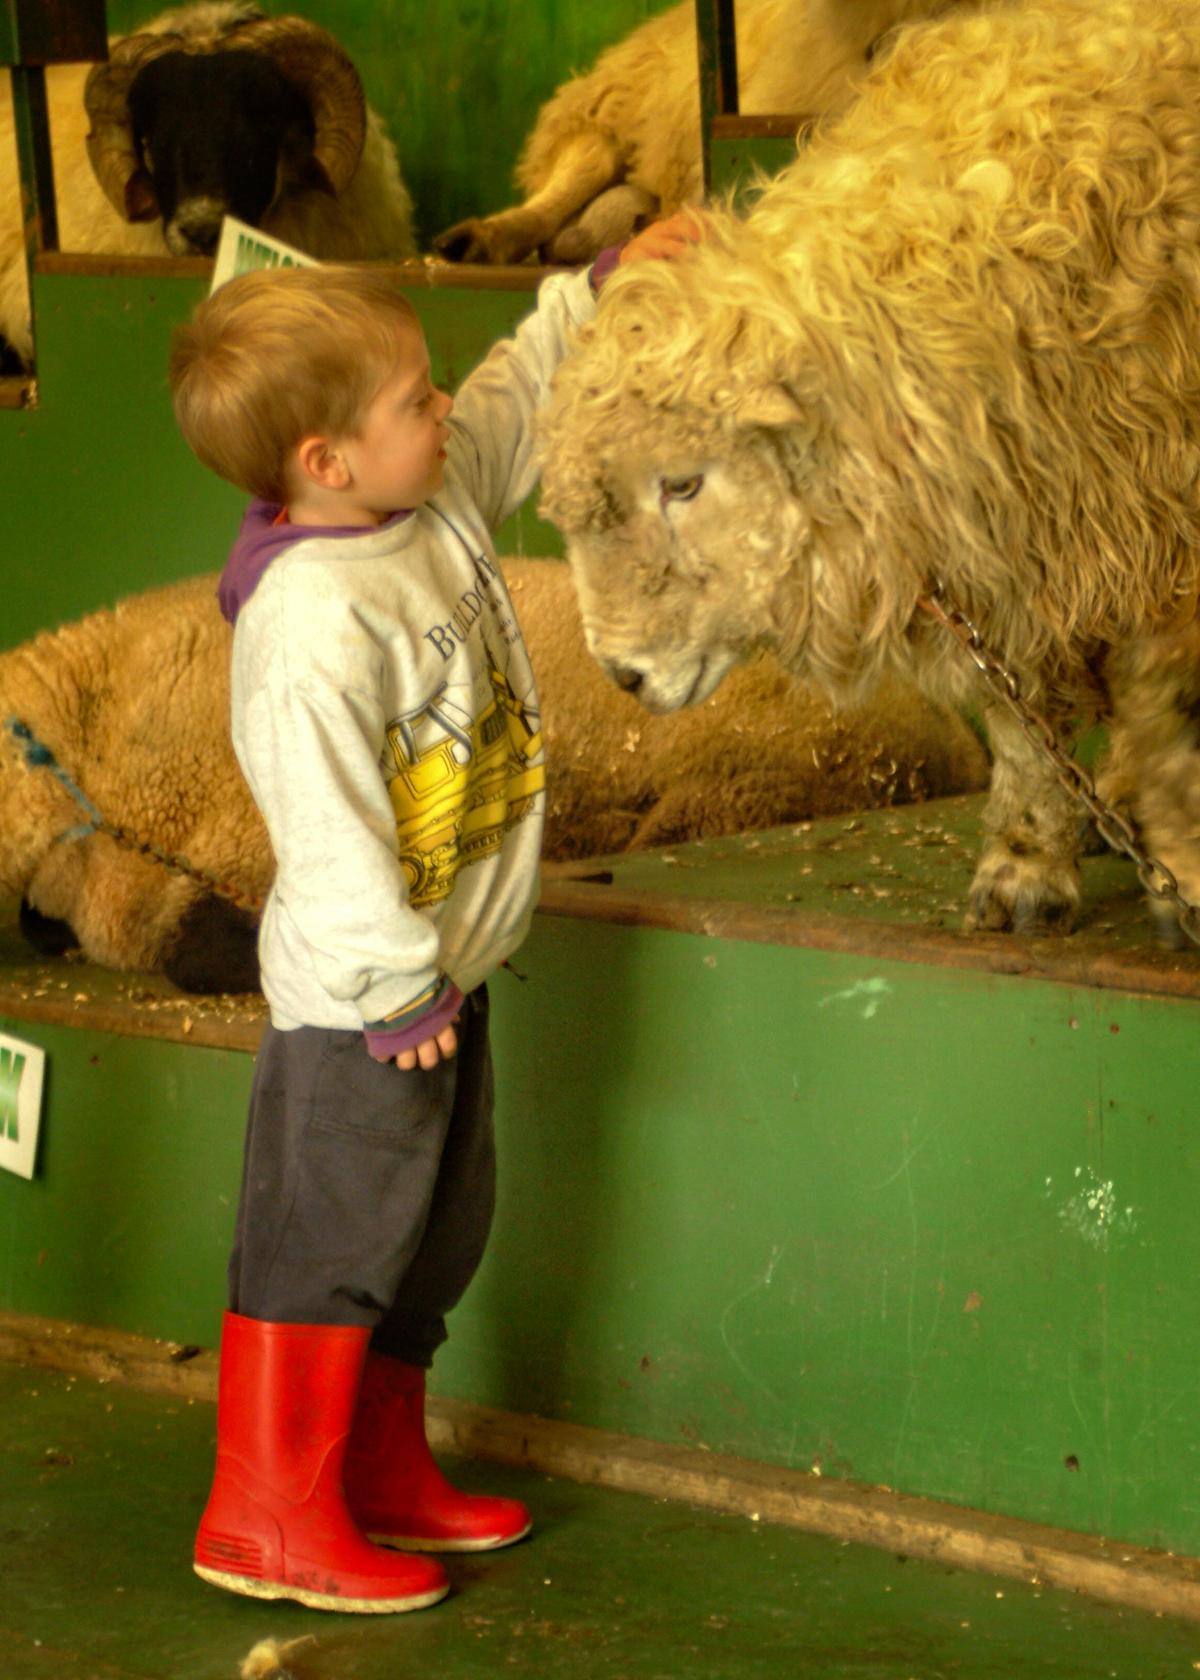 A young boy checks out a sheep up-close at Ewe-Phoria, a popular Welsh tourist attraction where visitors can learn about different types of sheep and watch demonstrations of sheepdog skills. (Copyright Fred J. Eckert)